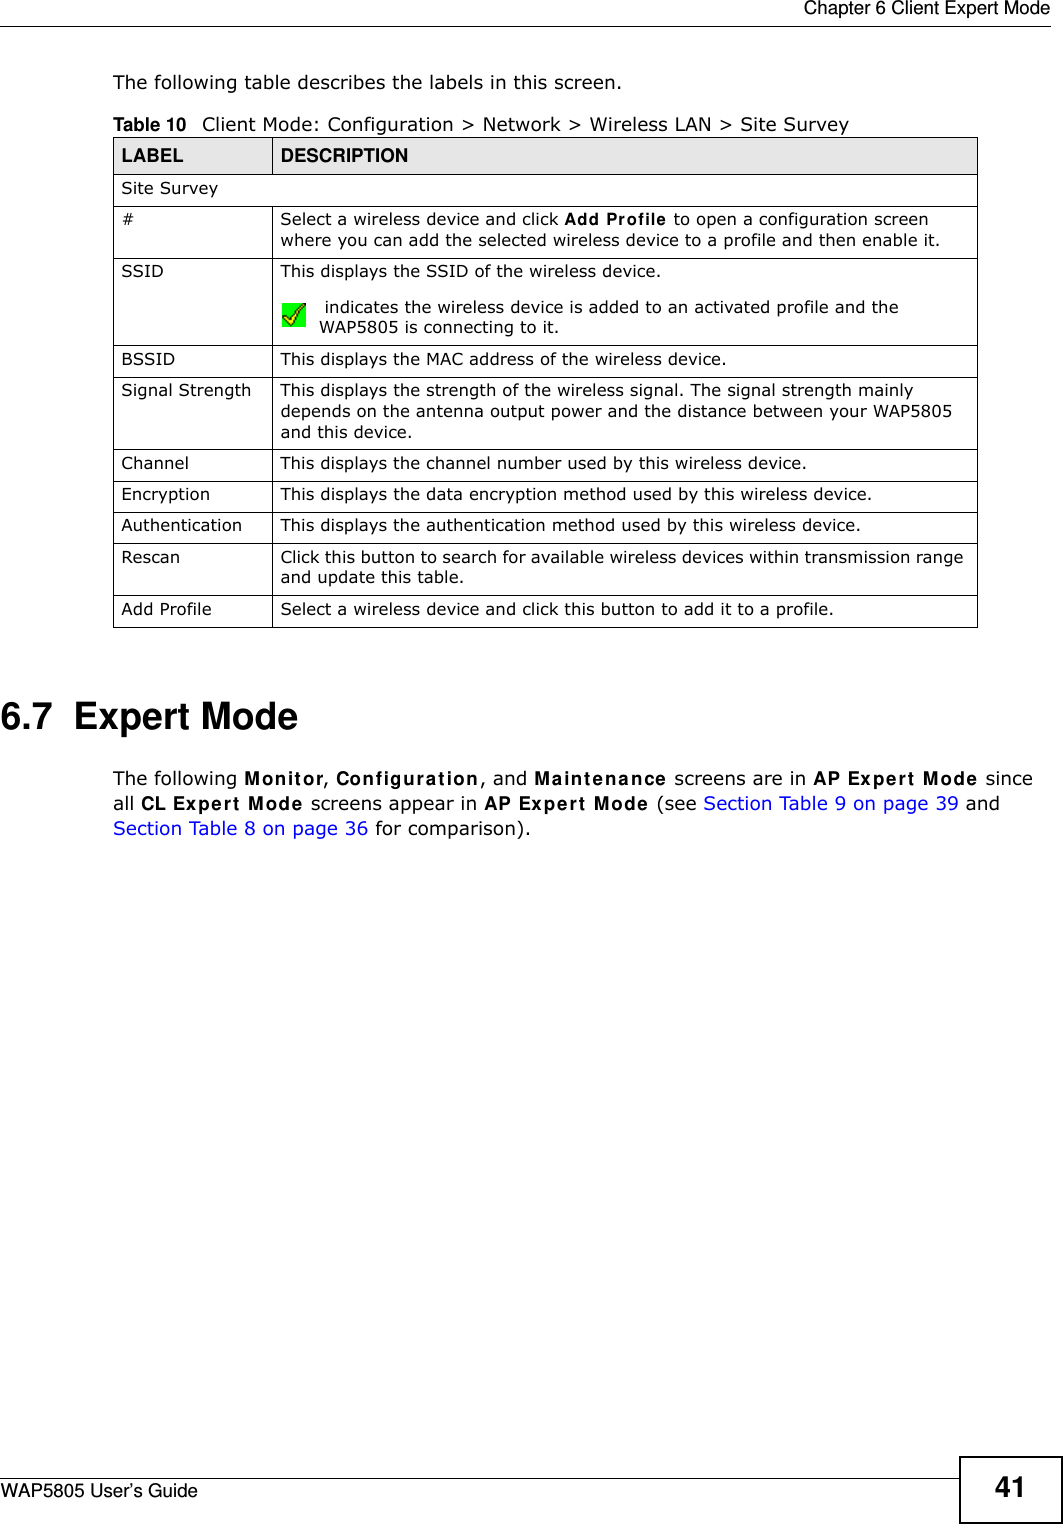  Chapter 6 Client Expert ModeWAP5805 User’s Guide 41The following table describes the labels in this screen. 6.7  Expert ModeThe following Monitor, Configuration, and Maintenance screens are in AP Expert Mode since all CL Expert Mode screens appear in AP Expert Mode (see Section Table 9 on page 39 and Section Table 8 on page 36 for comparison).Table 10   Client Mode: Configuration &gt; Network &gt; Wireless LAN &gt; Site SurveyLABEL  DESCRIPTIONSite Survey# Select a wireless device and click Add Profile to open a configuration screen where you can add the selected wireless device to a profile and then enable it.SSID This displays the SSID of the wireless device. indicates the wireless device is added to an activated profile and the WAP5805 is connecting to it.BSSID This displays the MAC address of the wireless device.Signal Strength This displays the strength of the wireless signal. The signal strength mainly depends on the antenna output power and the distance between your WAP5805 and this device.Channel This displays the channel number used by this wireless device. Encryption This displays the data encryption method used by this wireless device.Authentication This displays the authentication method used by this wireless device.Rescan Click this button to search for available wireless devices within transmission range and update this table.Add Profile Select a wireless device and click this button to add it to a profile.